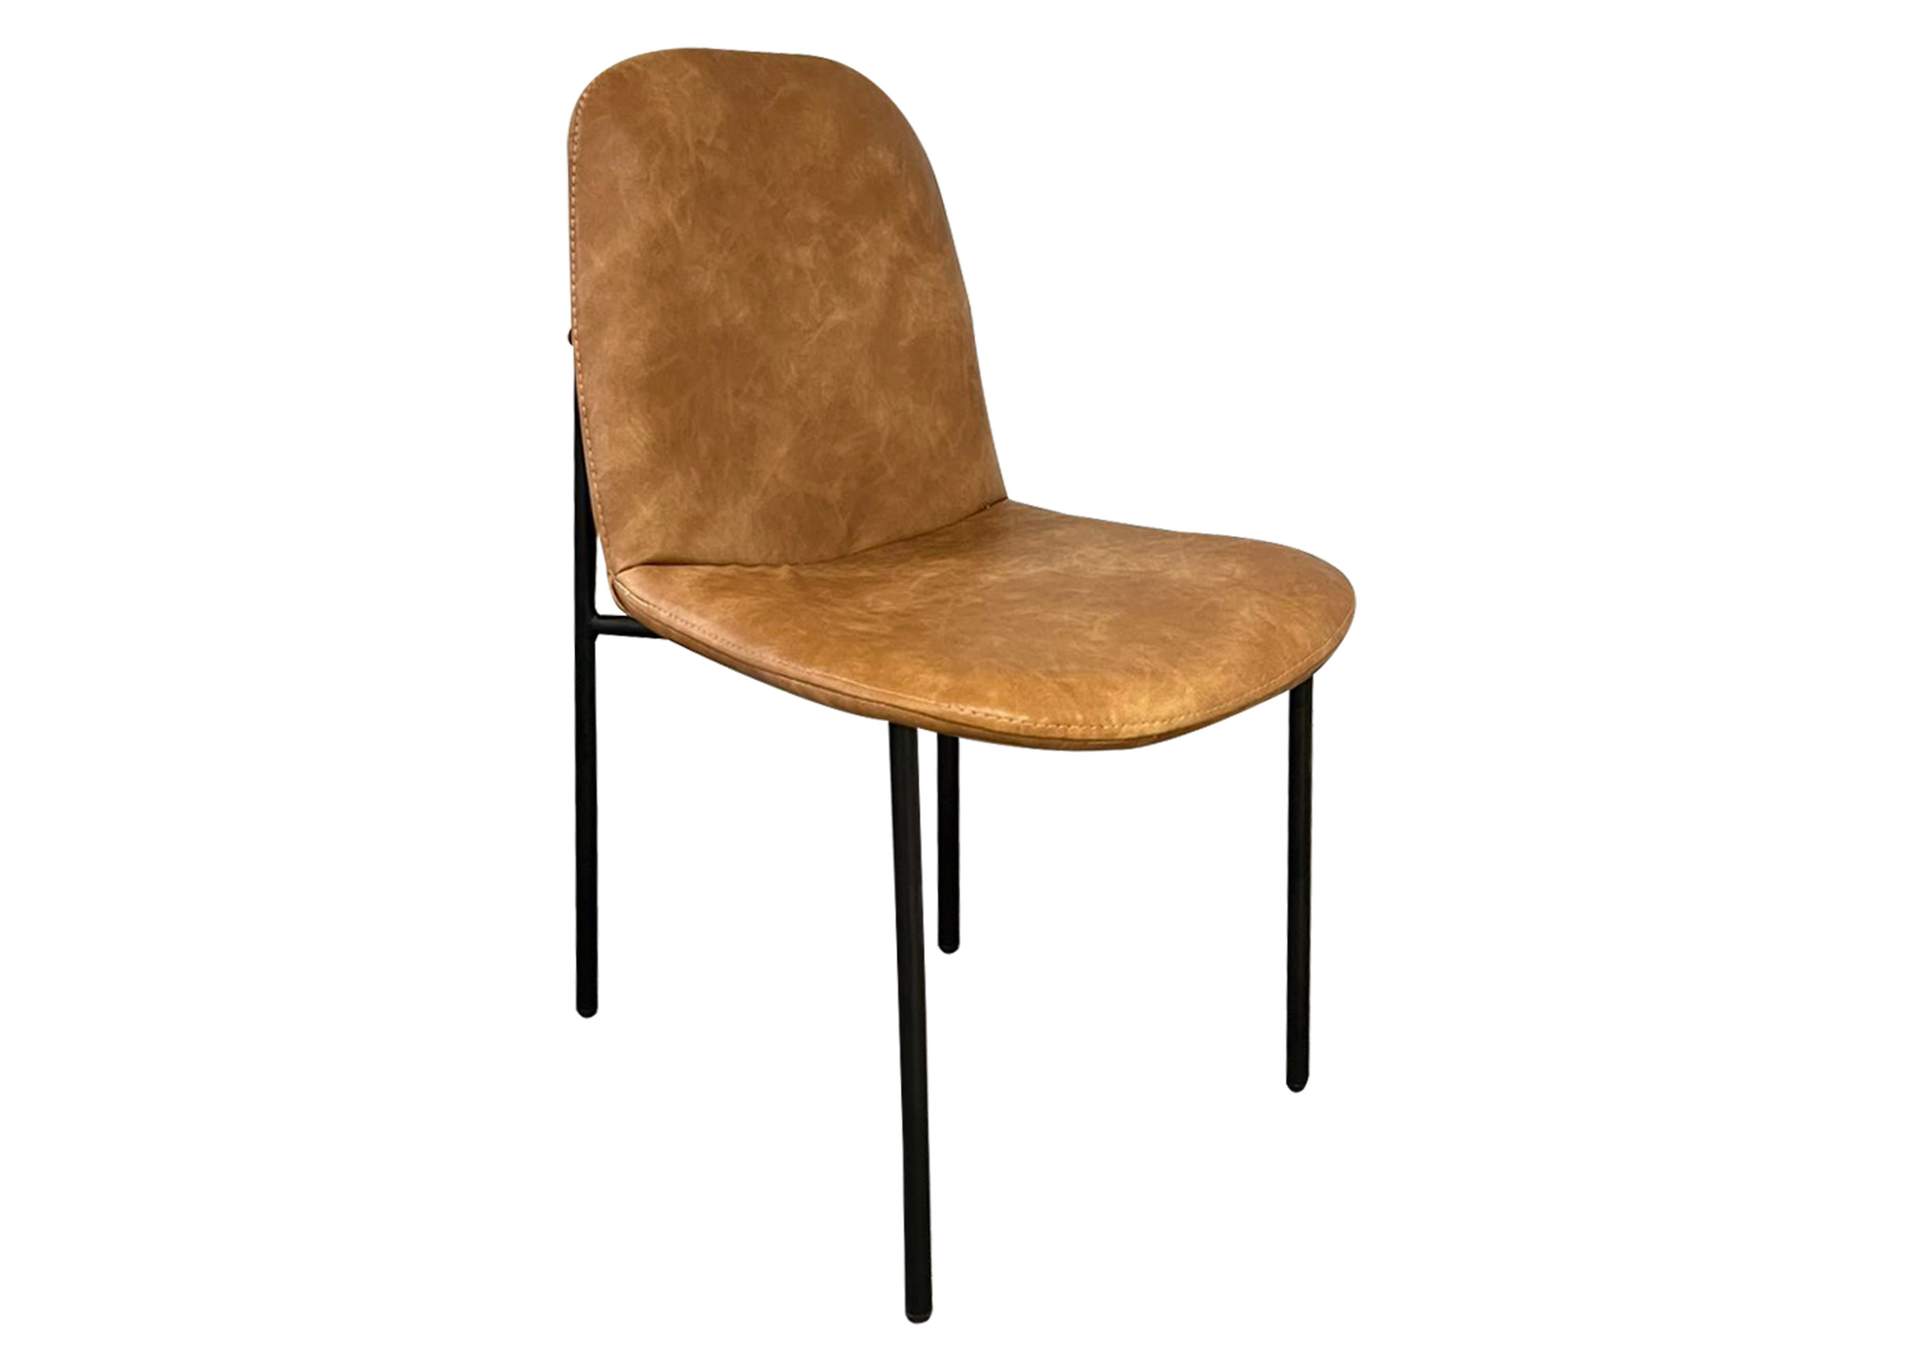 Sahara Upholstered Chair w/ brown faux leather,International Furniture Direct